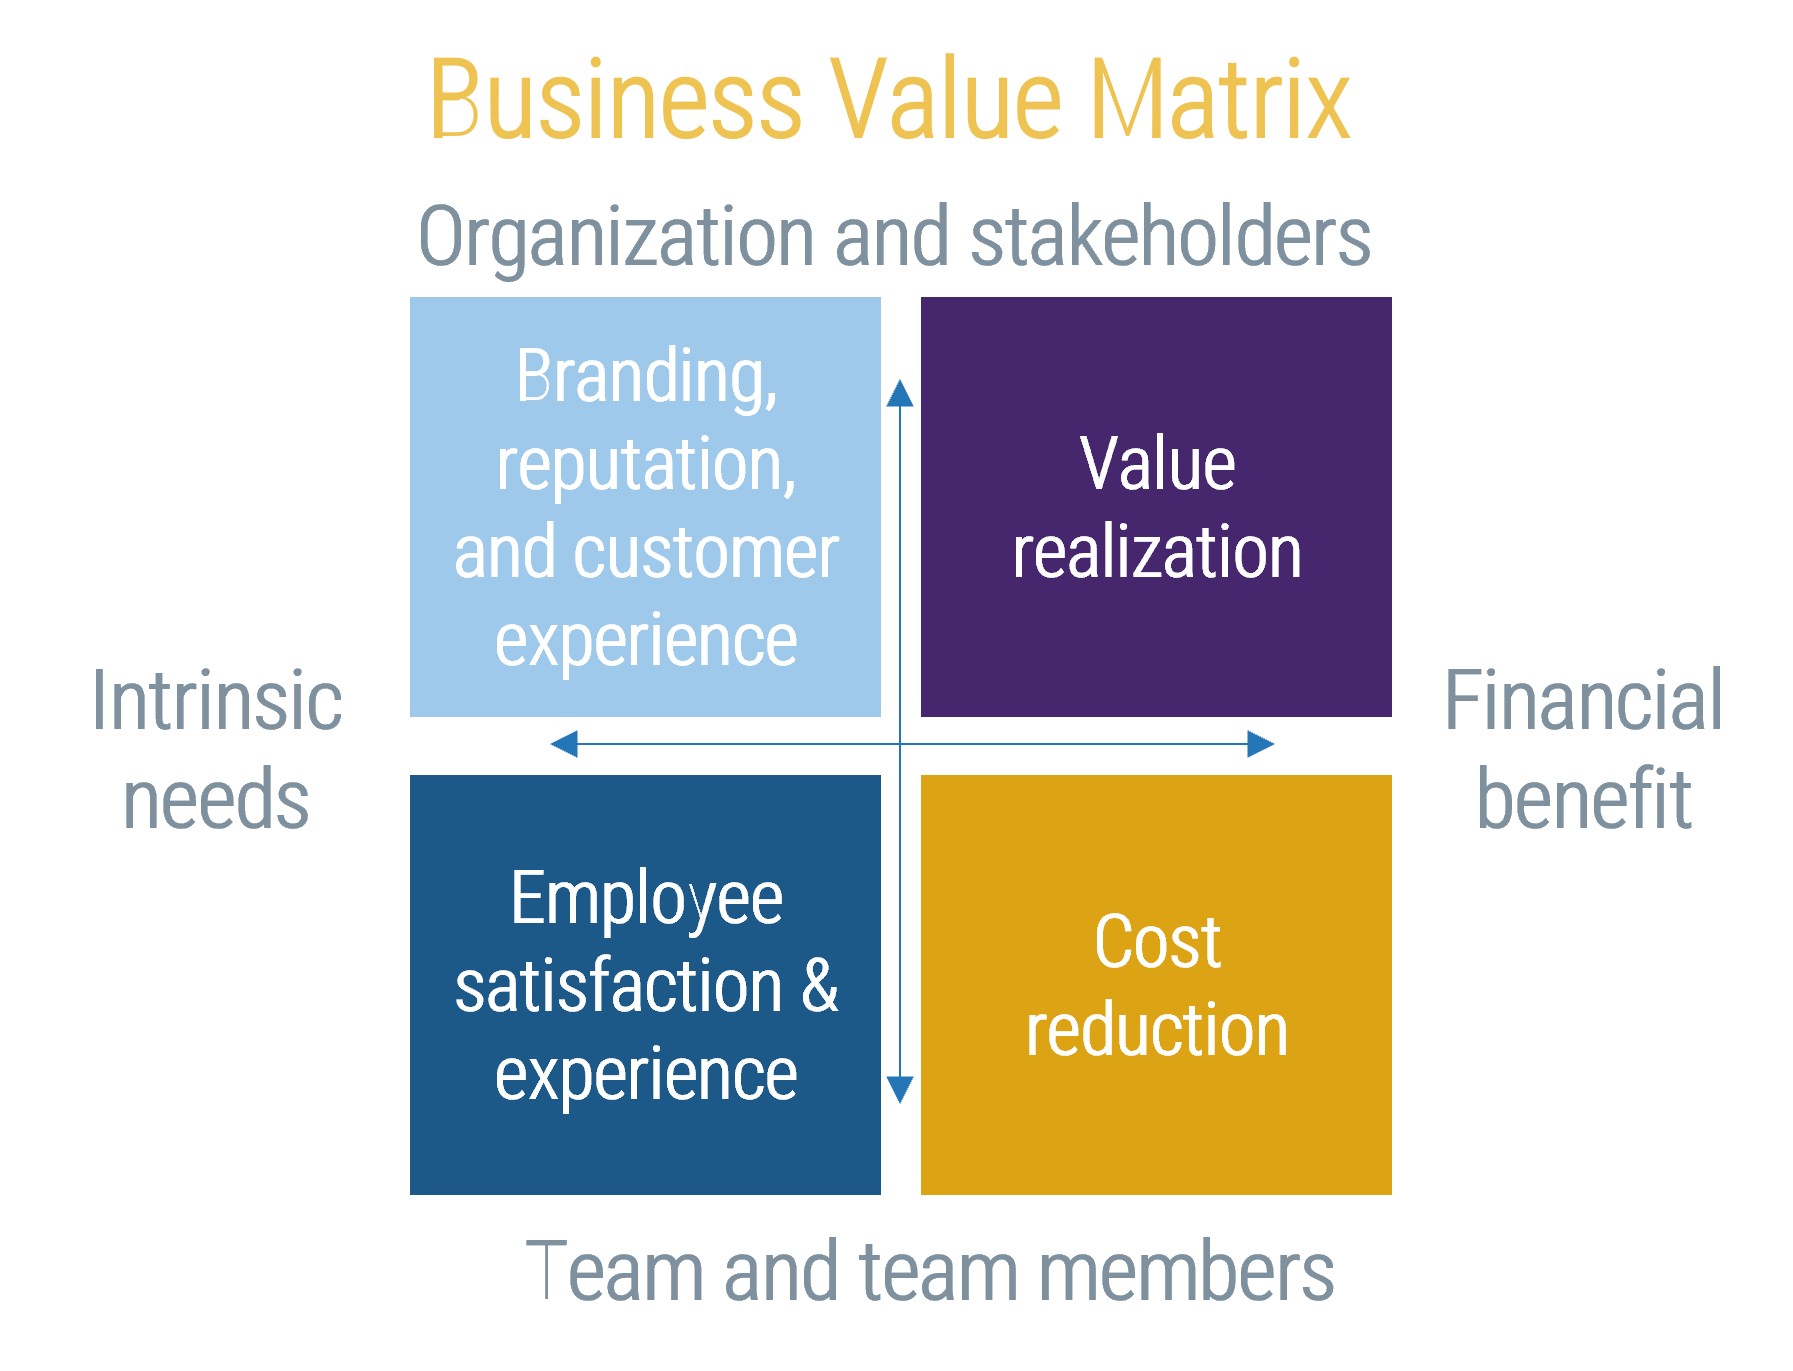 An image of the Business Value Matrix for Gen AI